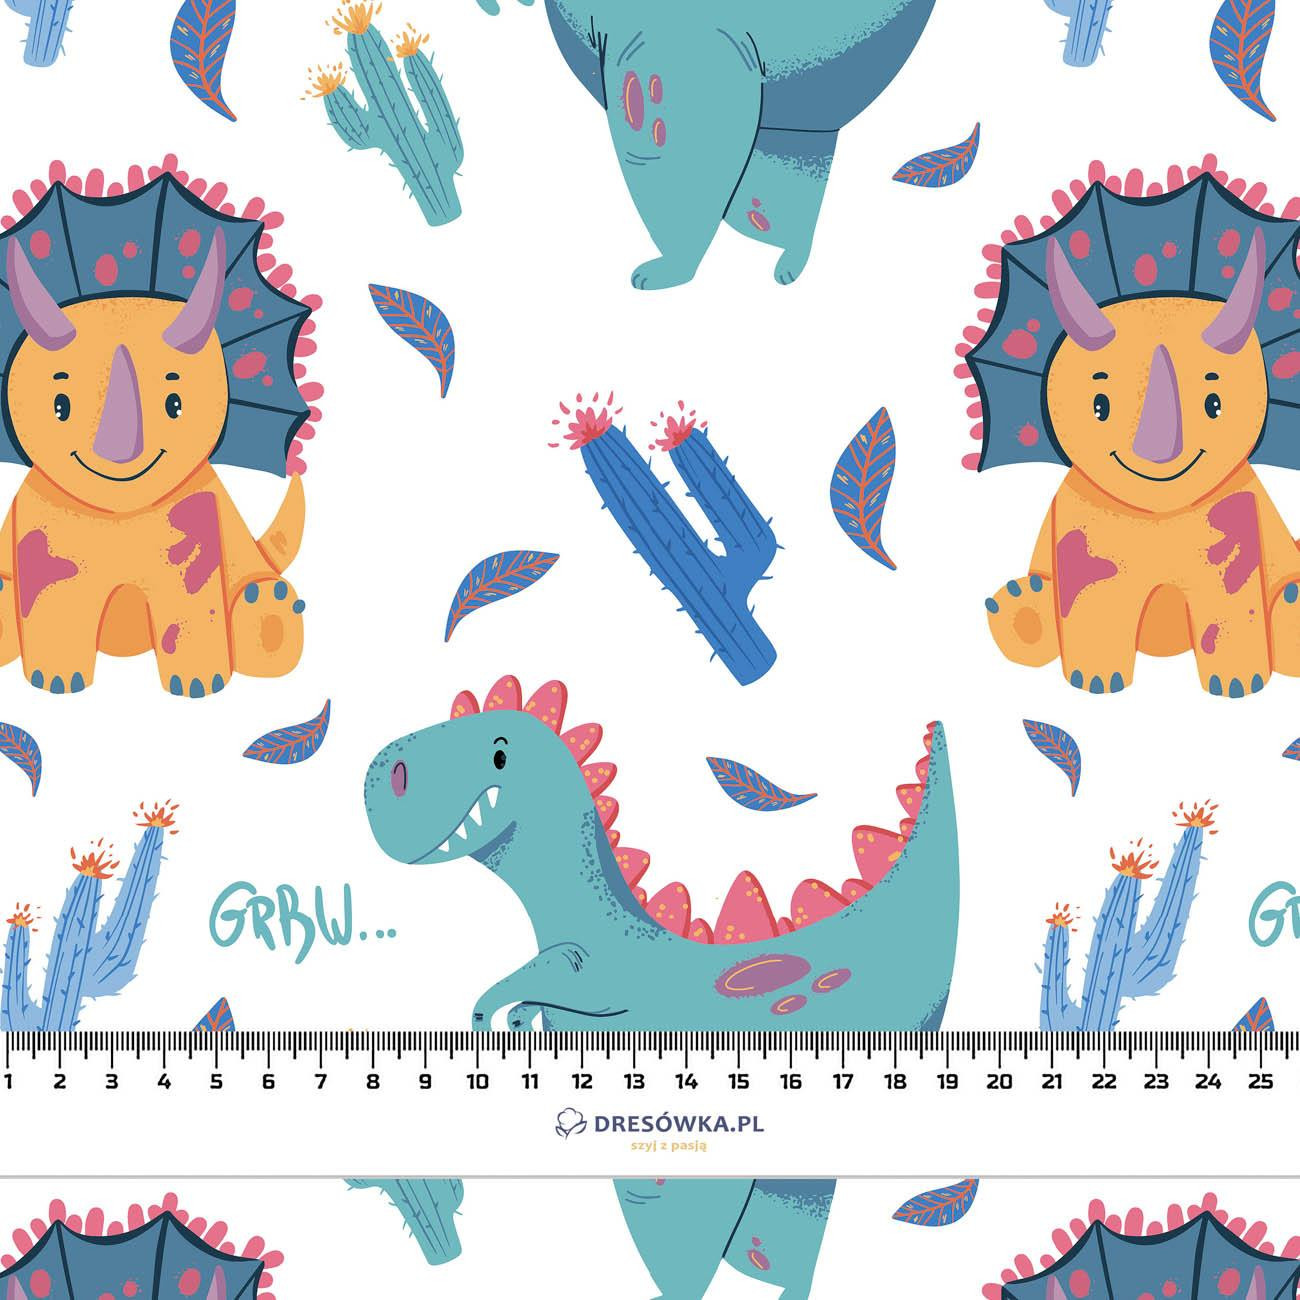 TRICERATOPS - Waterproof woven fabric